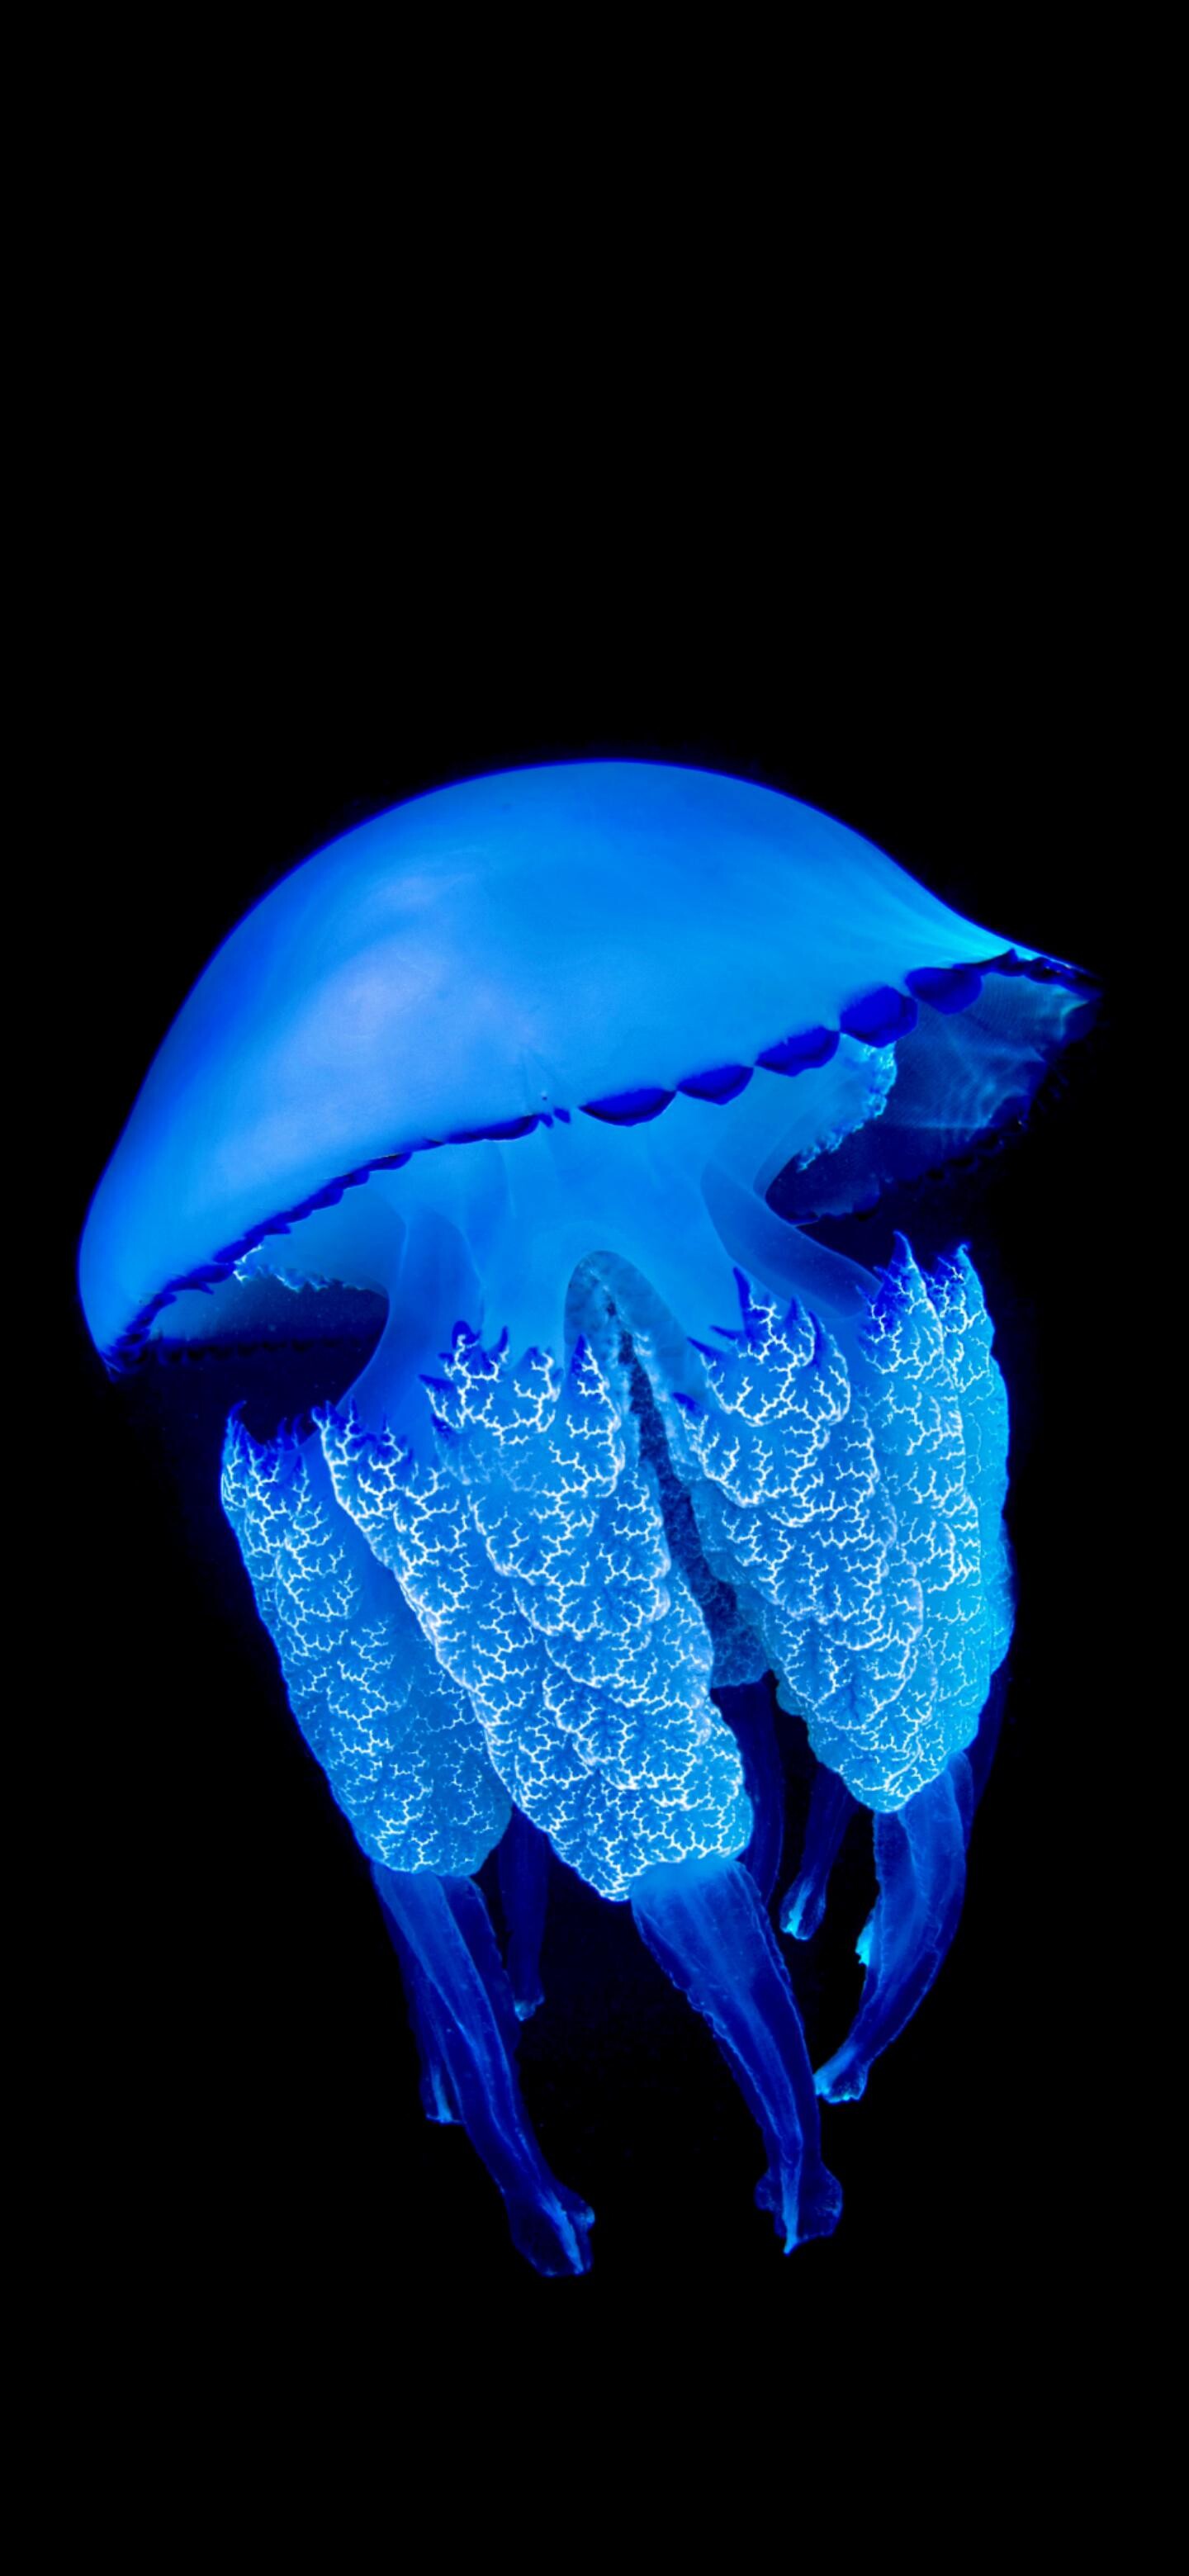 HD wallpaper, Background Perfection, Refined Beauty, Iphone Hd Glowing Jellyfish Background Image, Marvelous Jellyfish, 1440X3120 Hd Phone, Captivating Creatures